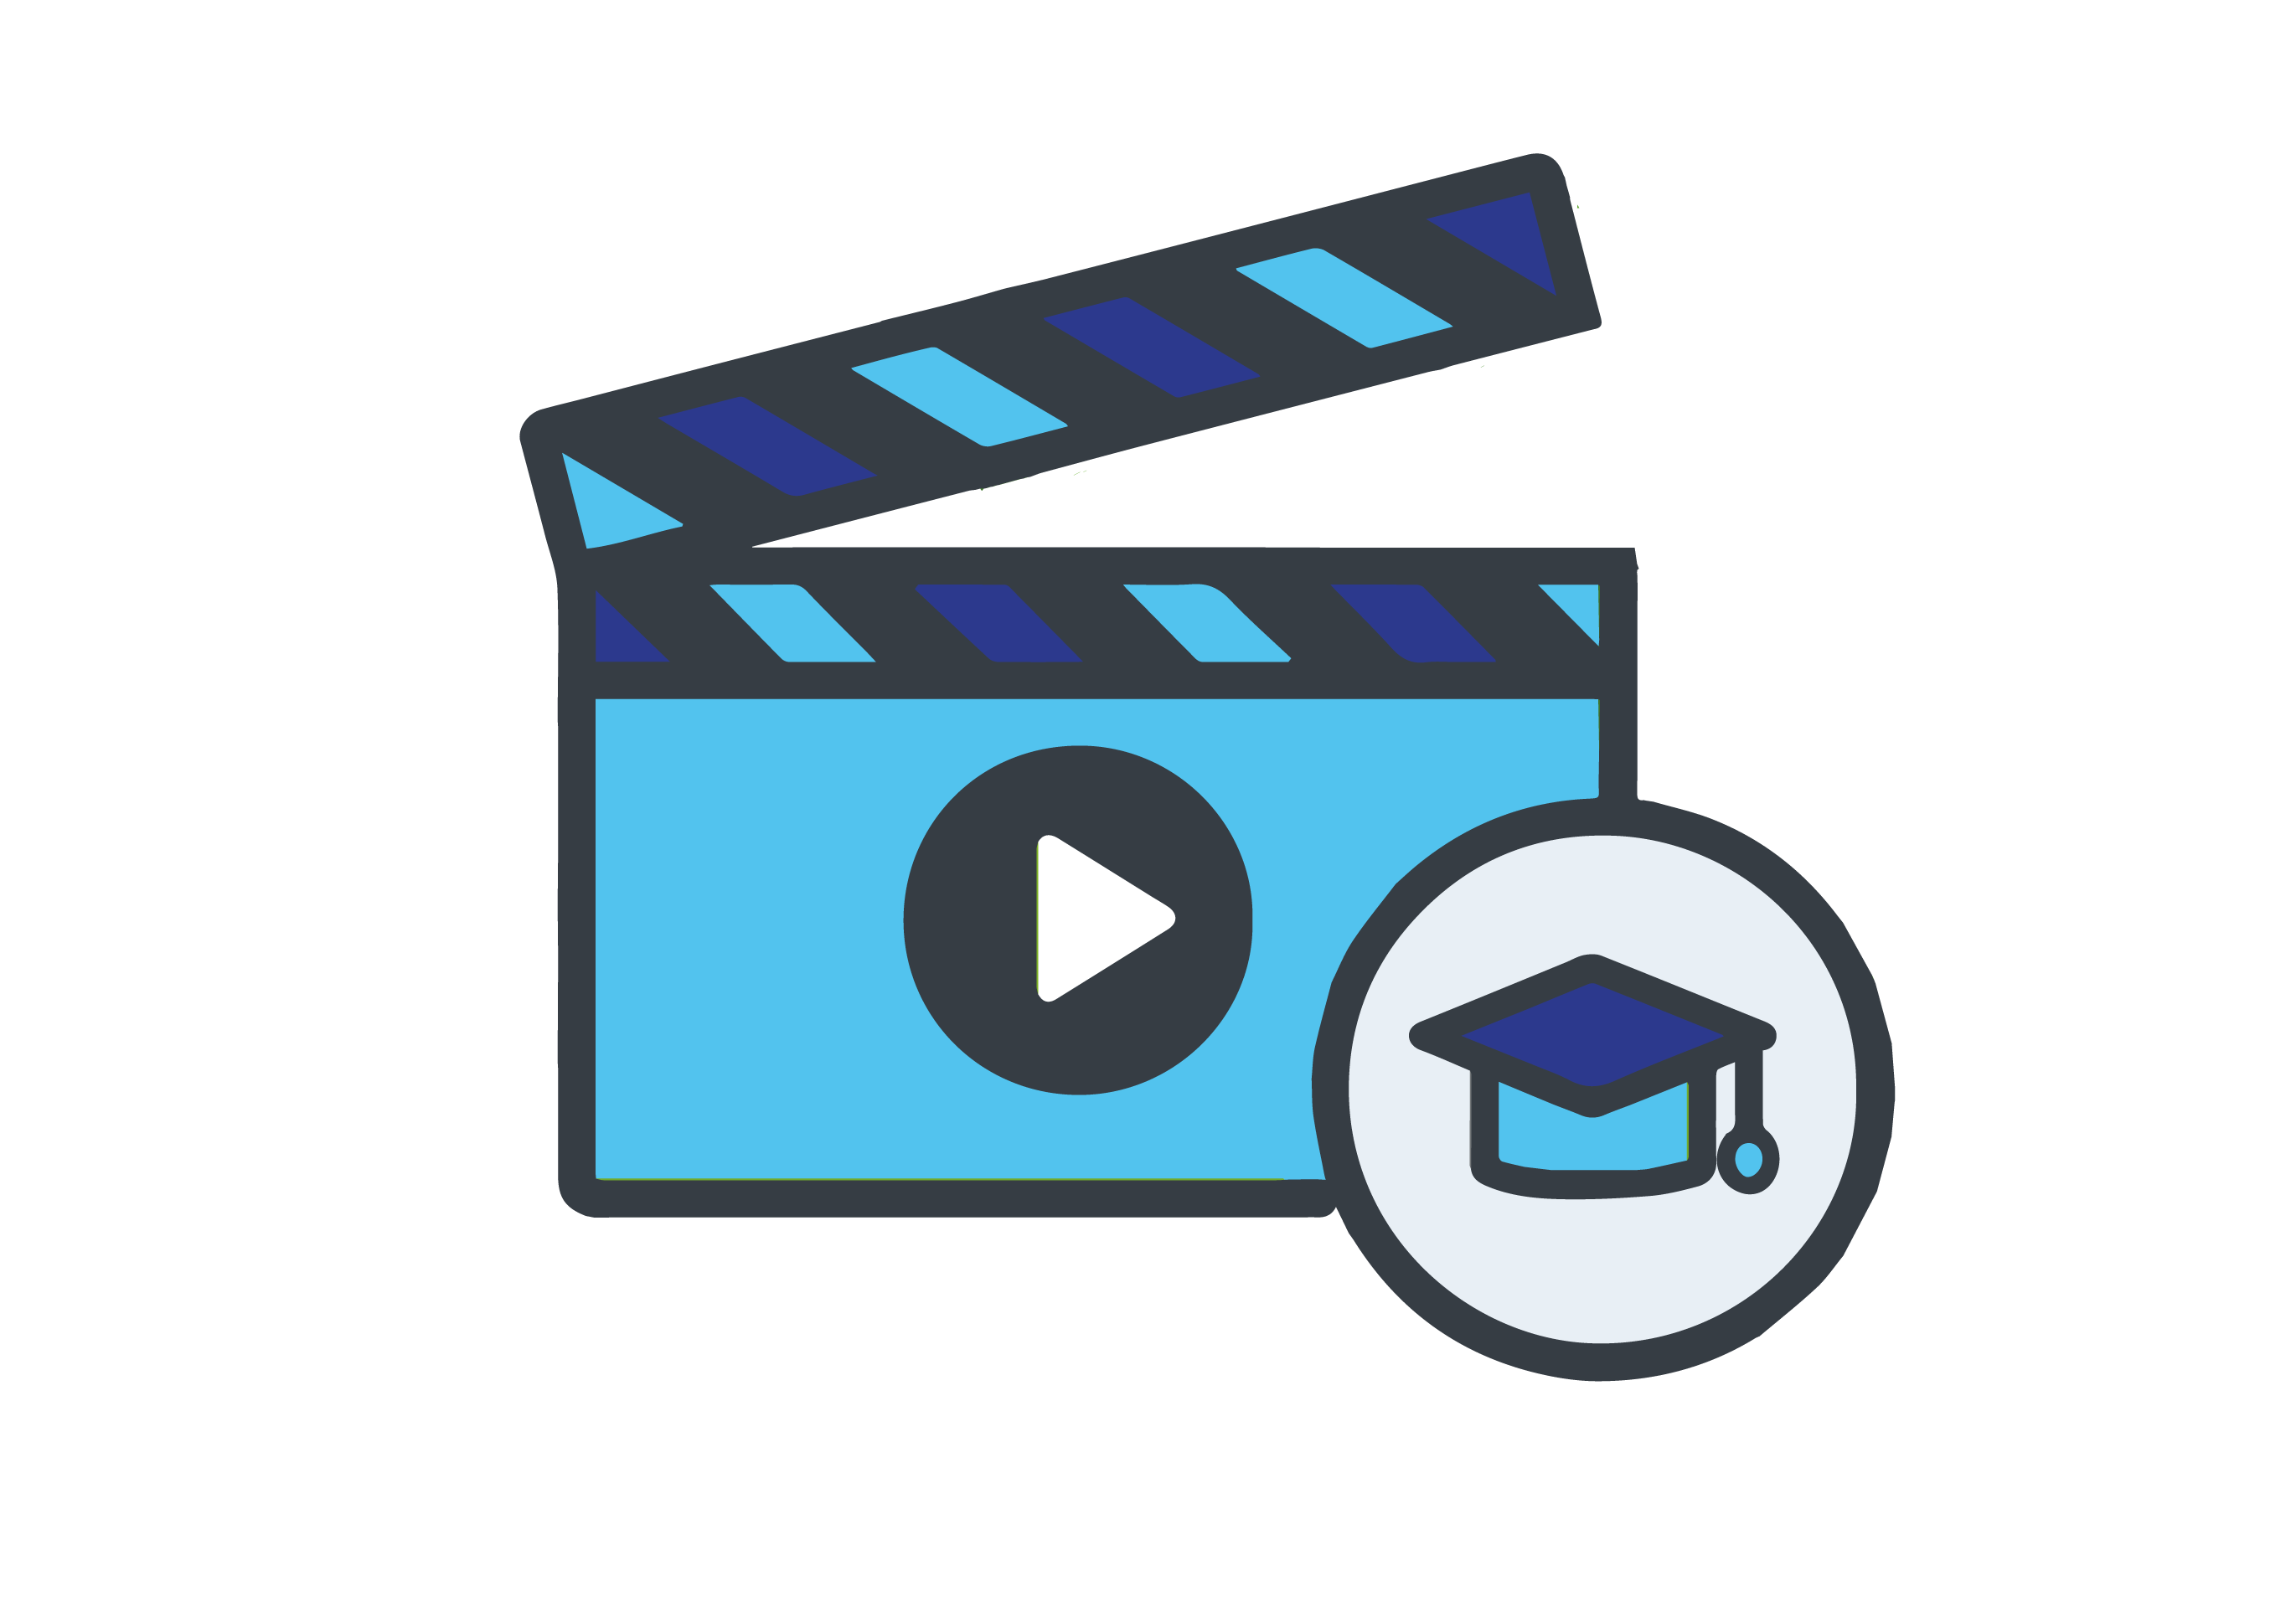 Video training sent to employees 